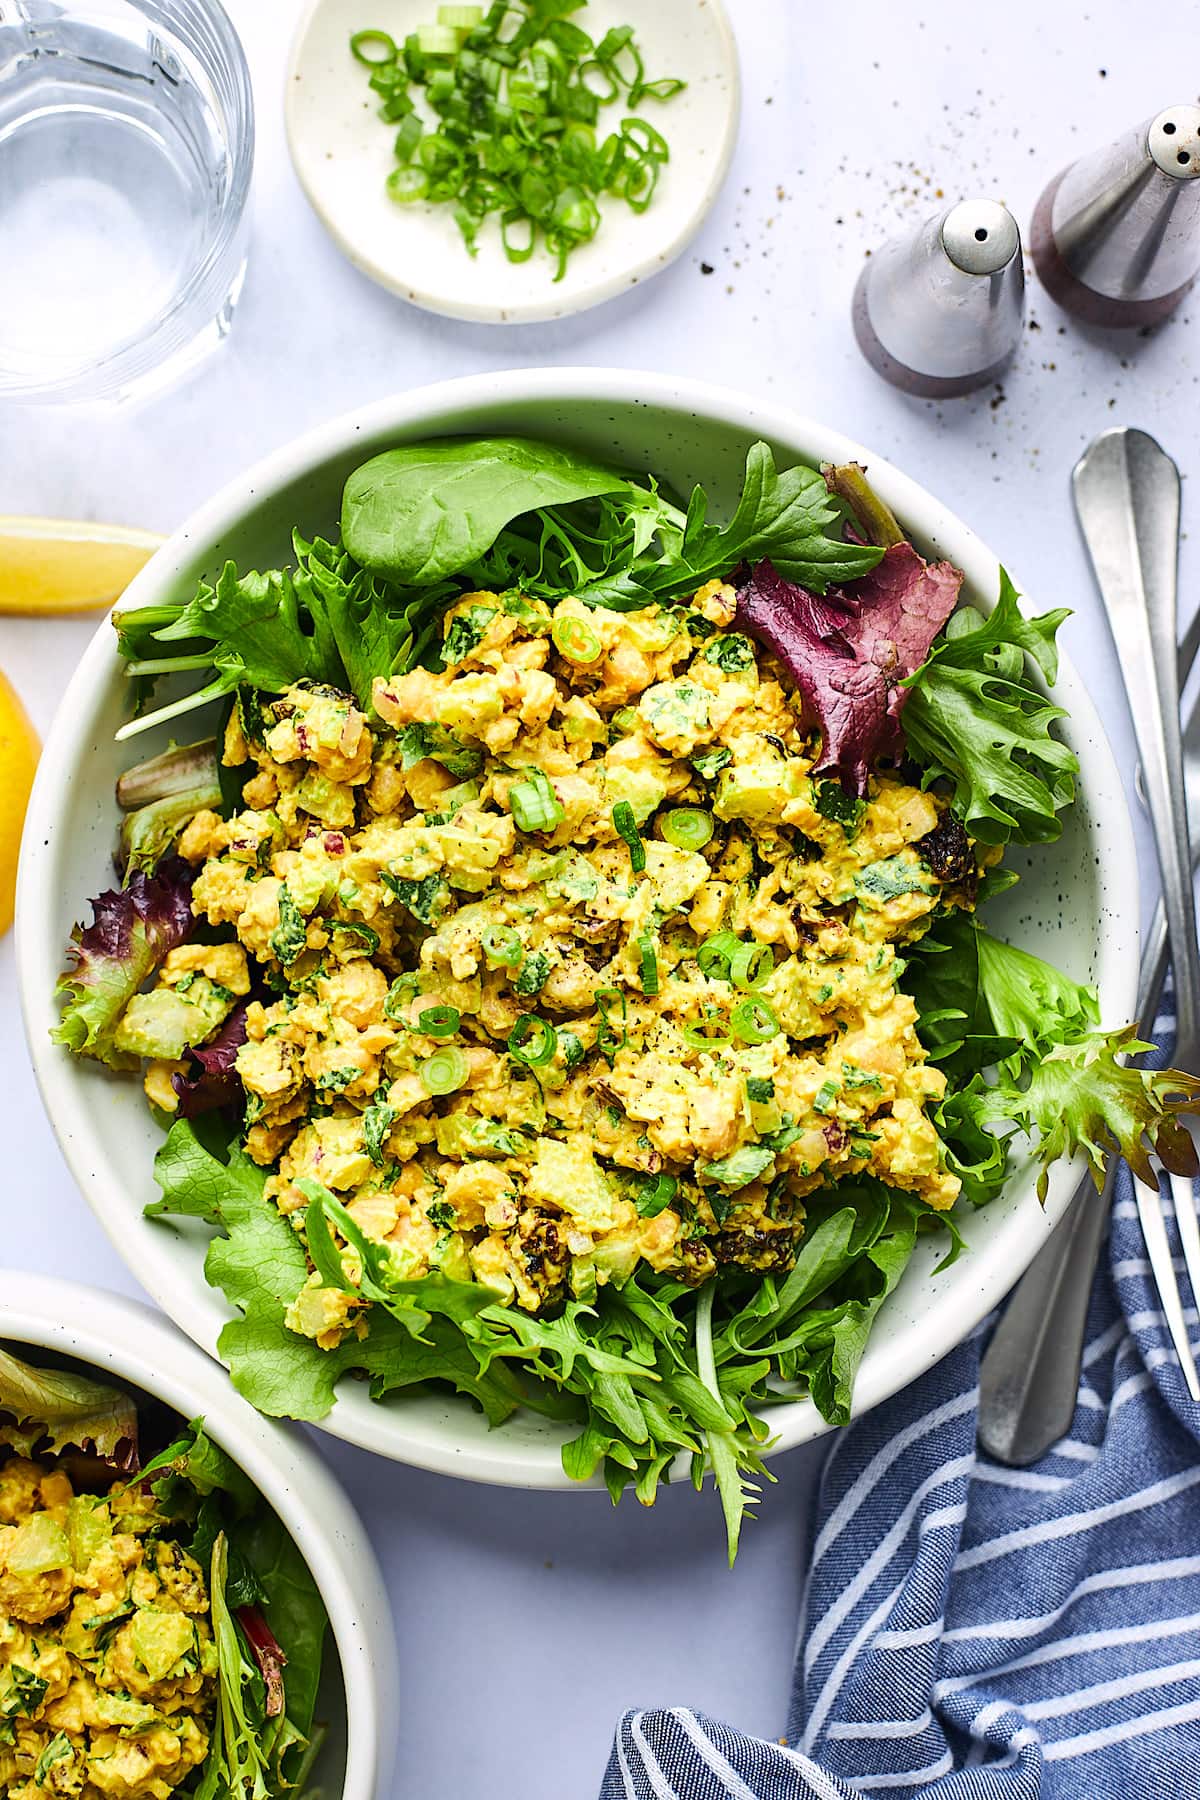 curried chickpea salad on bed of greens in white bowl.